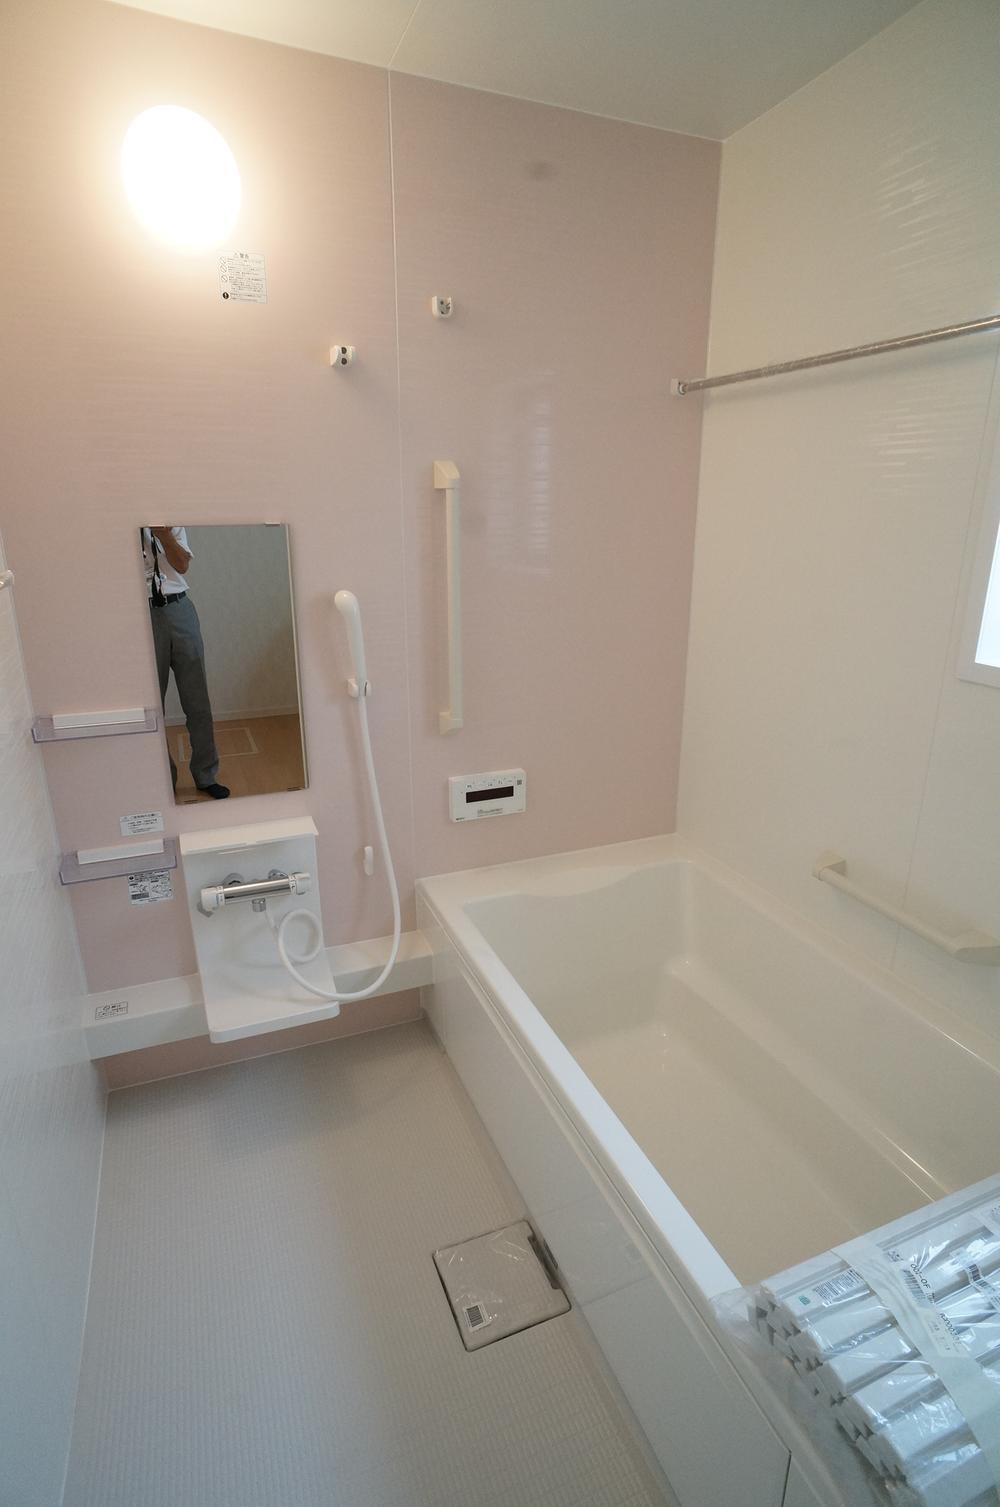 Same specifications photo (bathroom). It is the example of construction of the same construction company.  It is different from the actual photo